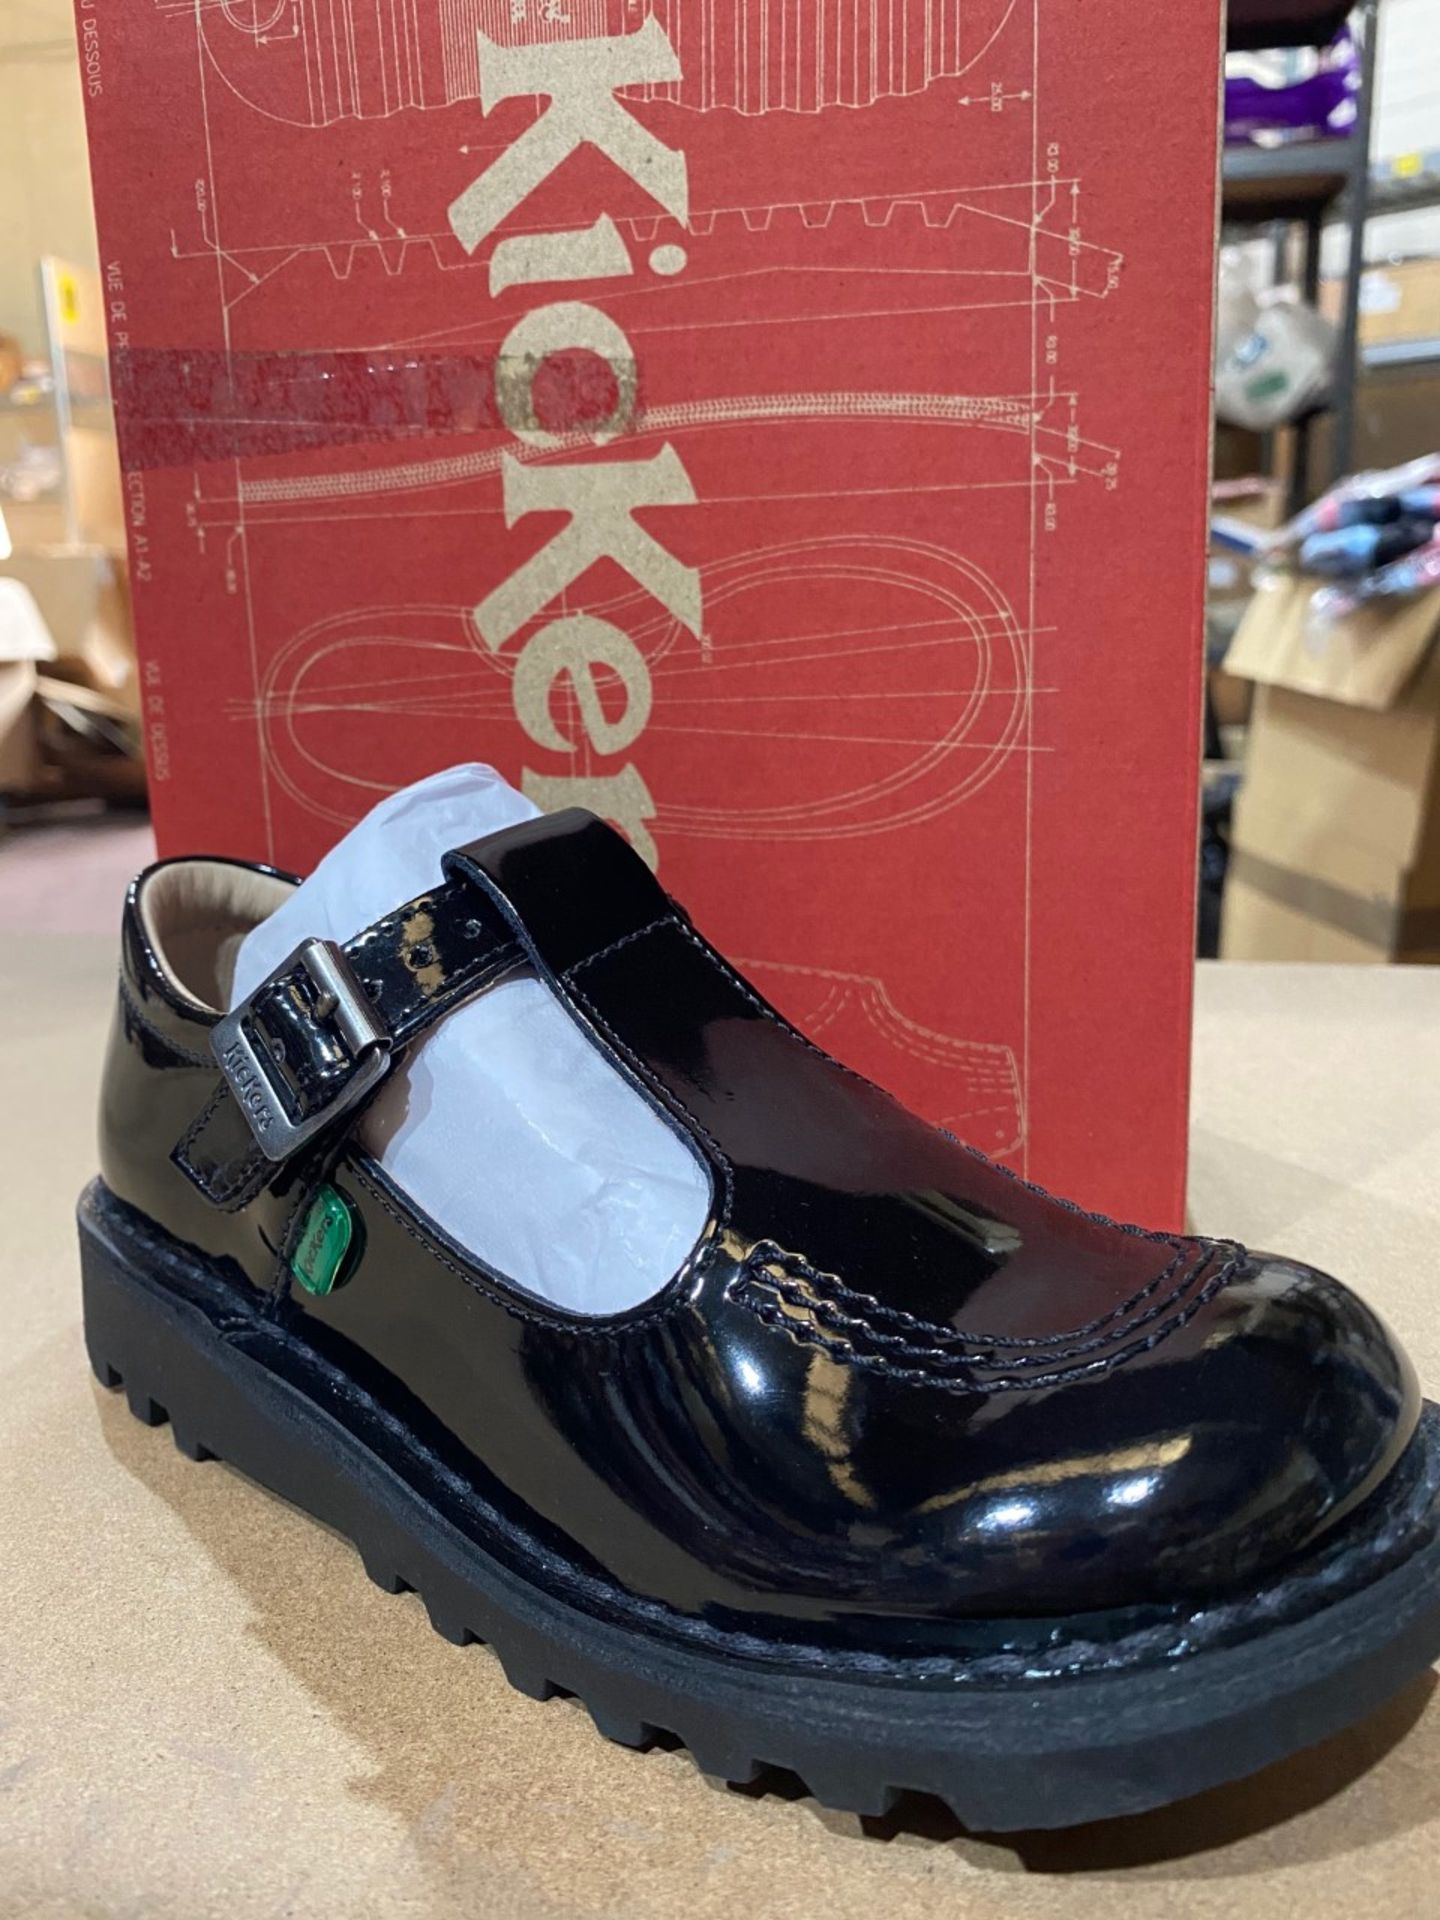 (NO VAT) 3 X NEW BOXED PAIRS OF KICKERS SHOES SIZE UK INFANT 13